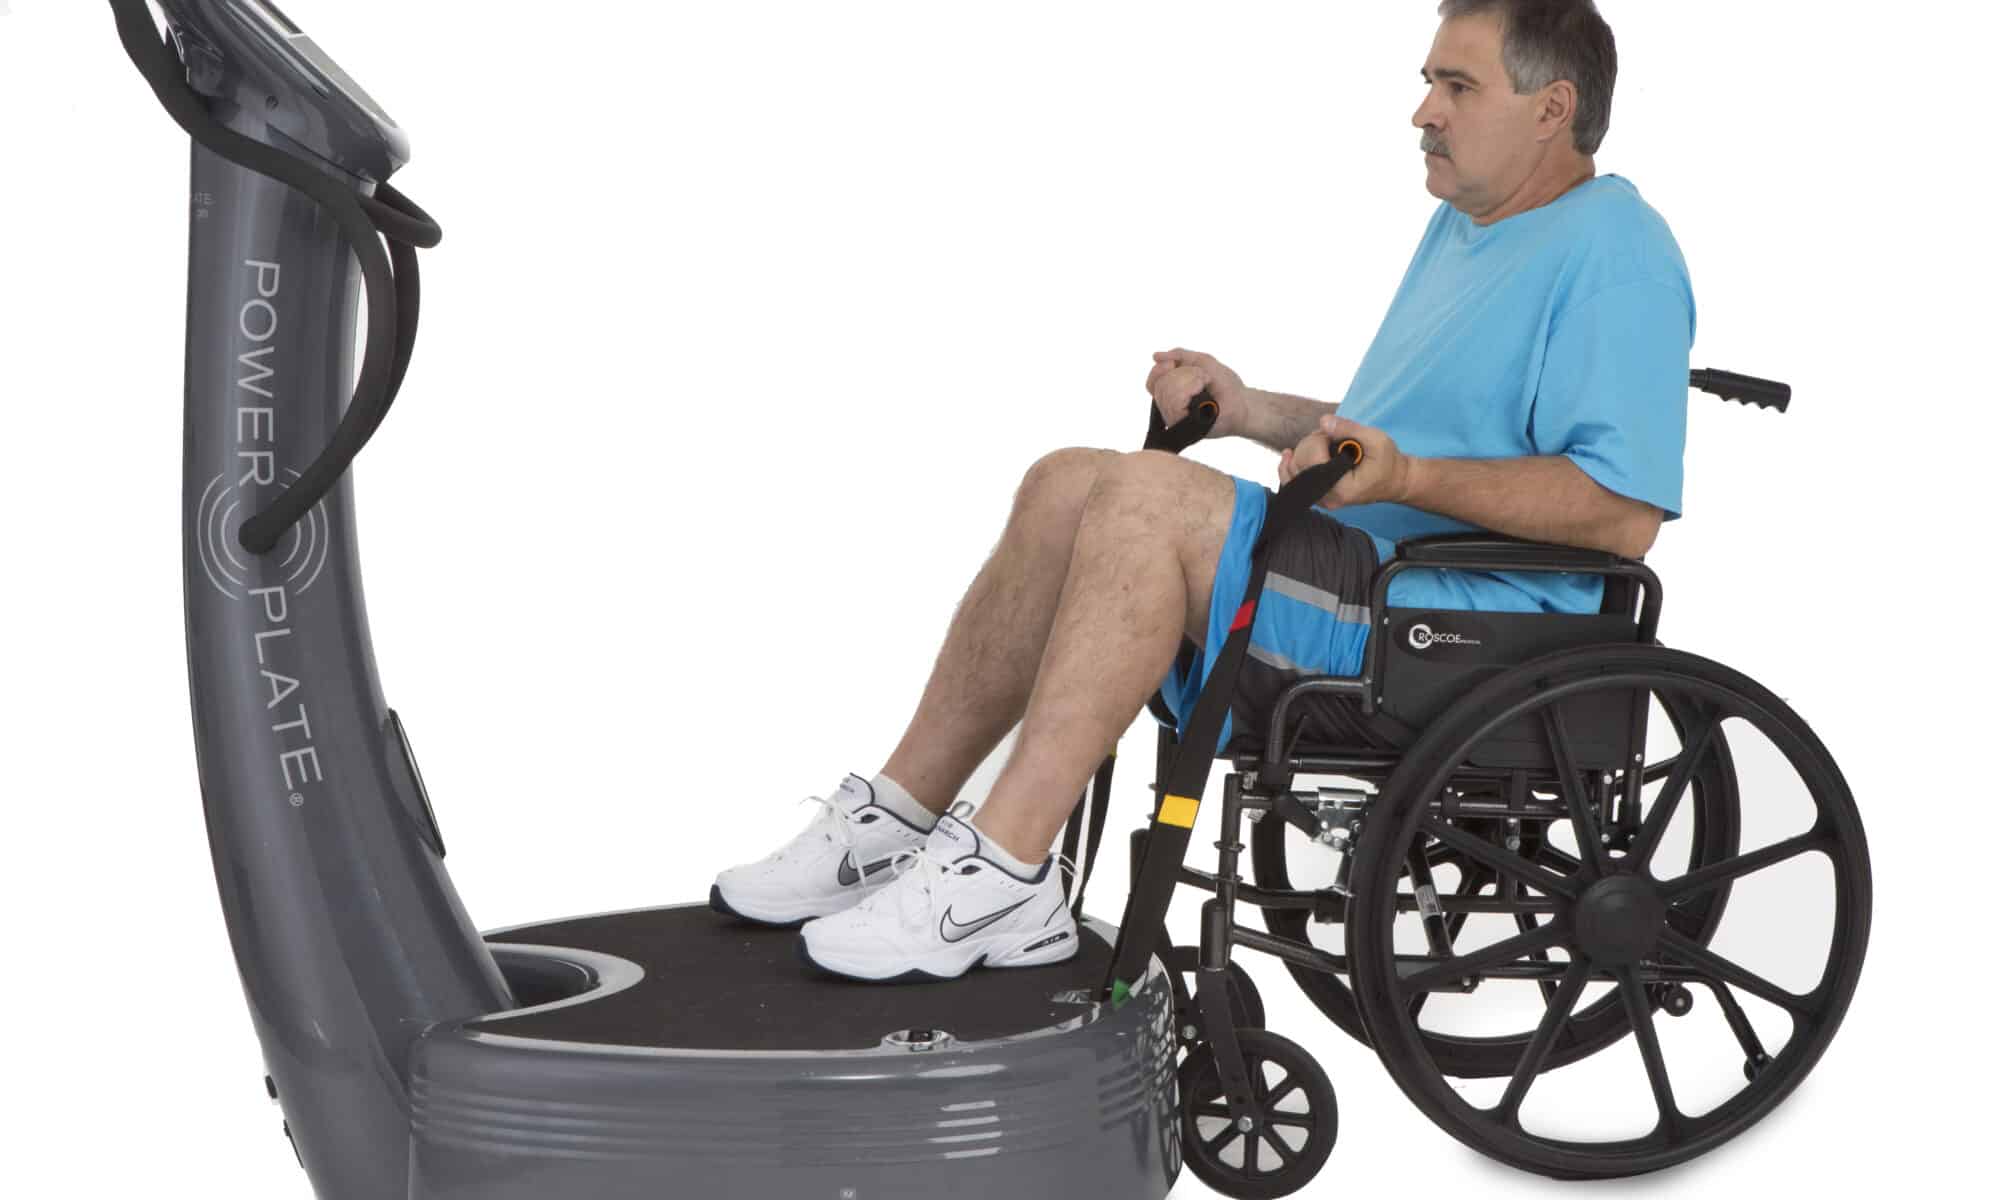 Power Plate whole body vibration for medical reasons